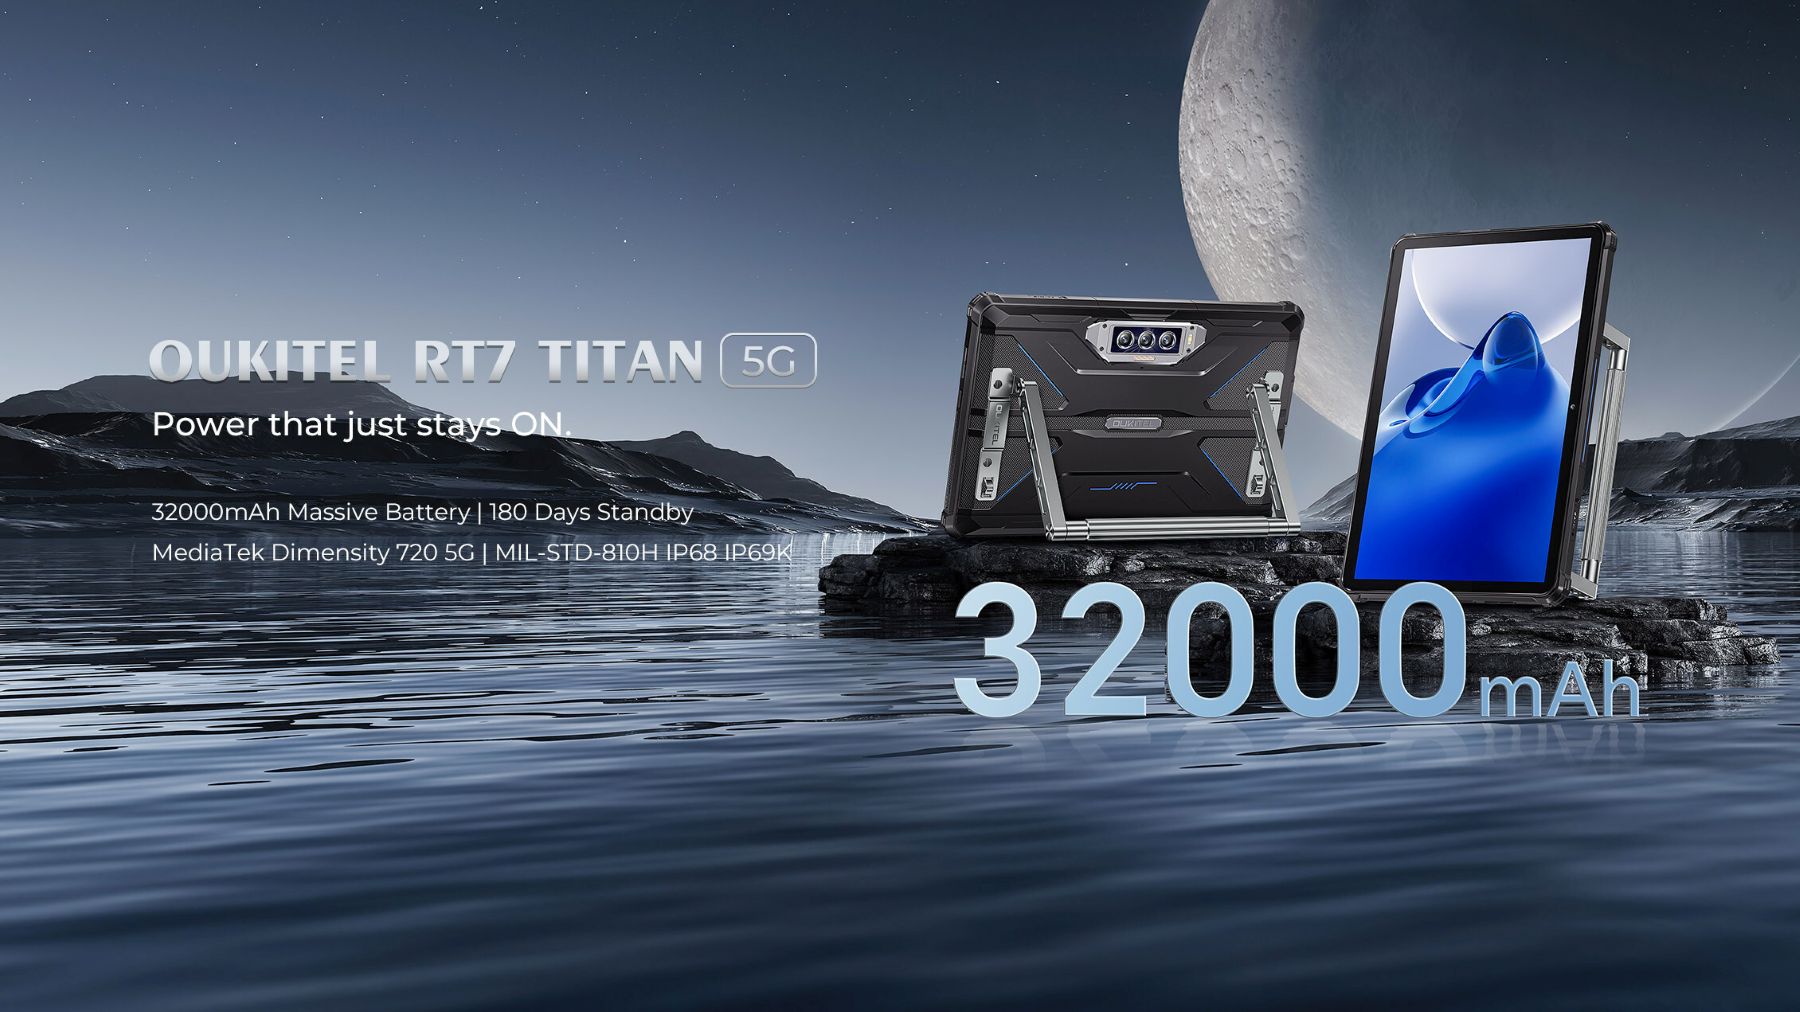 OUKITEL RT7 Titan, the world's first 5G rugged tablet with a revolutionary  32,000mAh battery will be launched on AliExpress on 21 Aug, 2023